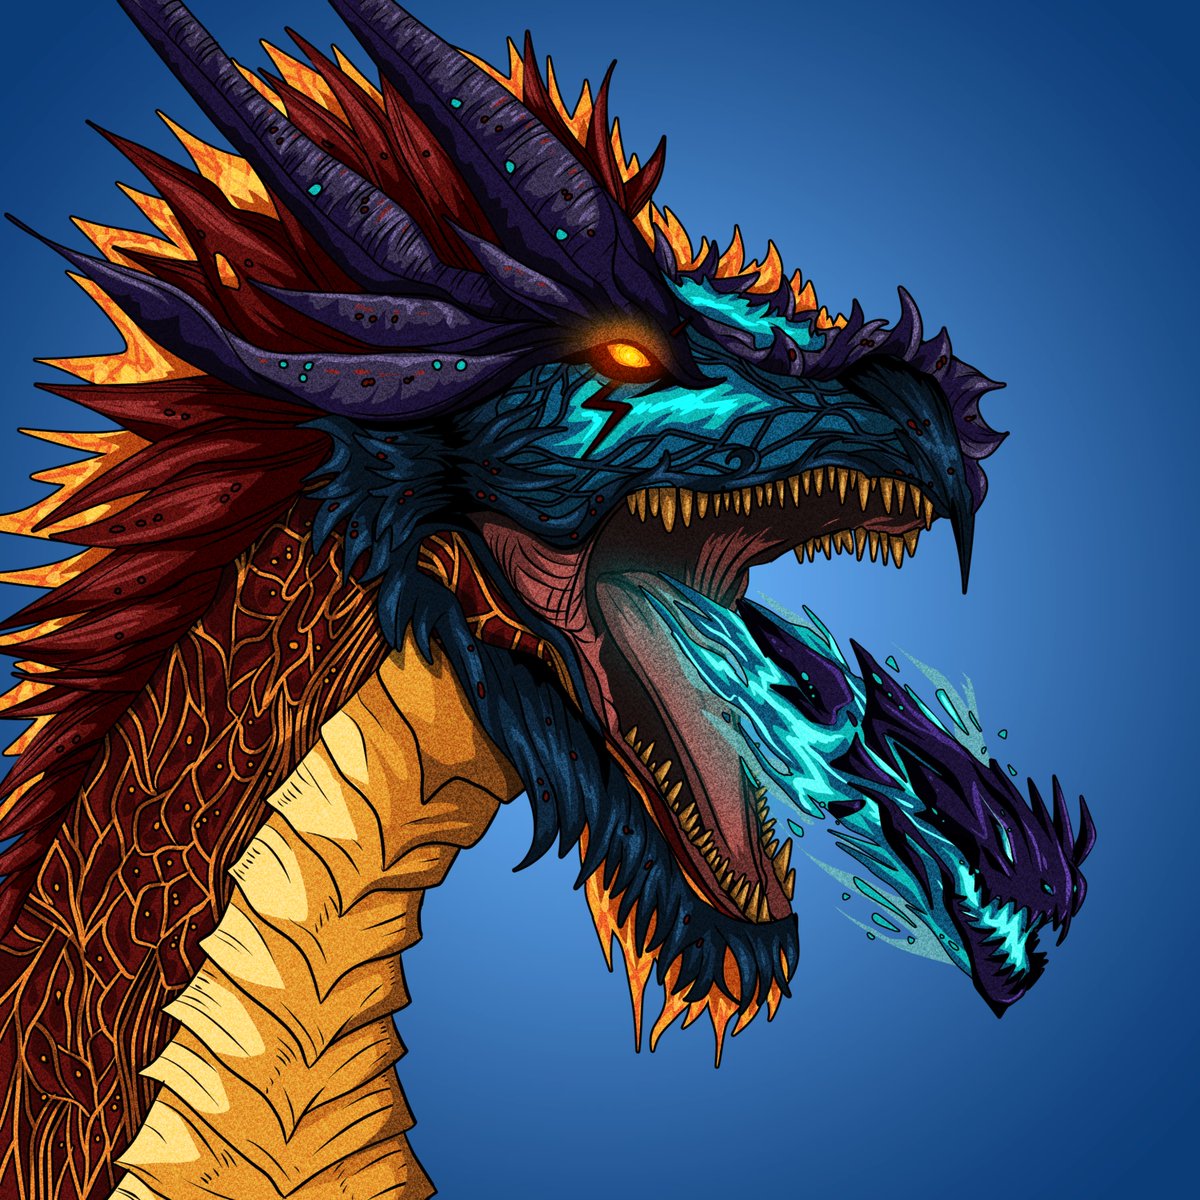 AZURONG #NFT SNEAK PEEK ⛩️ They say dragons never truly die. No matter how many times you kill them ⚔️ AZURONG is coming soon to @cryptocomnft with a massive utility and suitable price, stay tuned 🔥 🐉 2,700 Unique NFTs 📆 To be announced